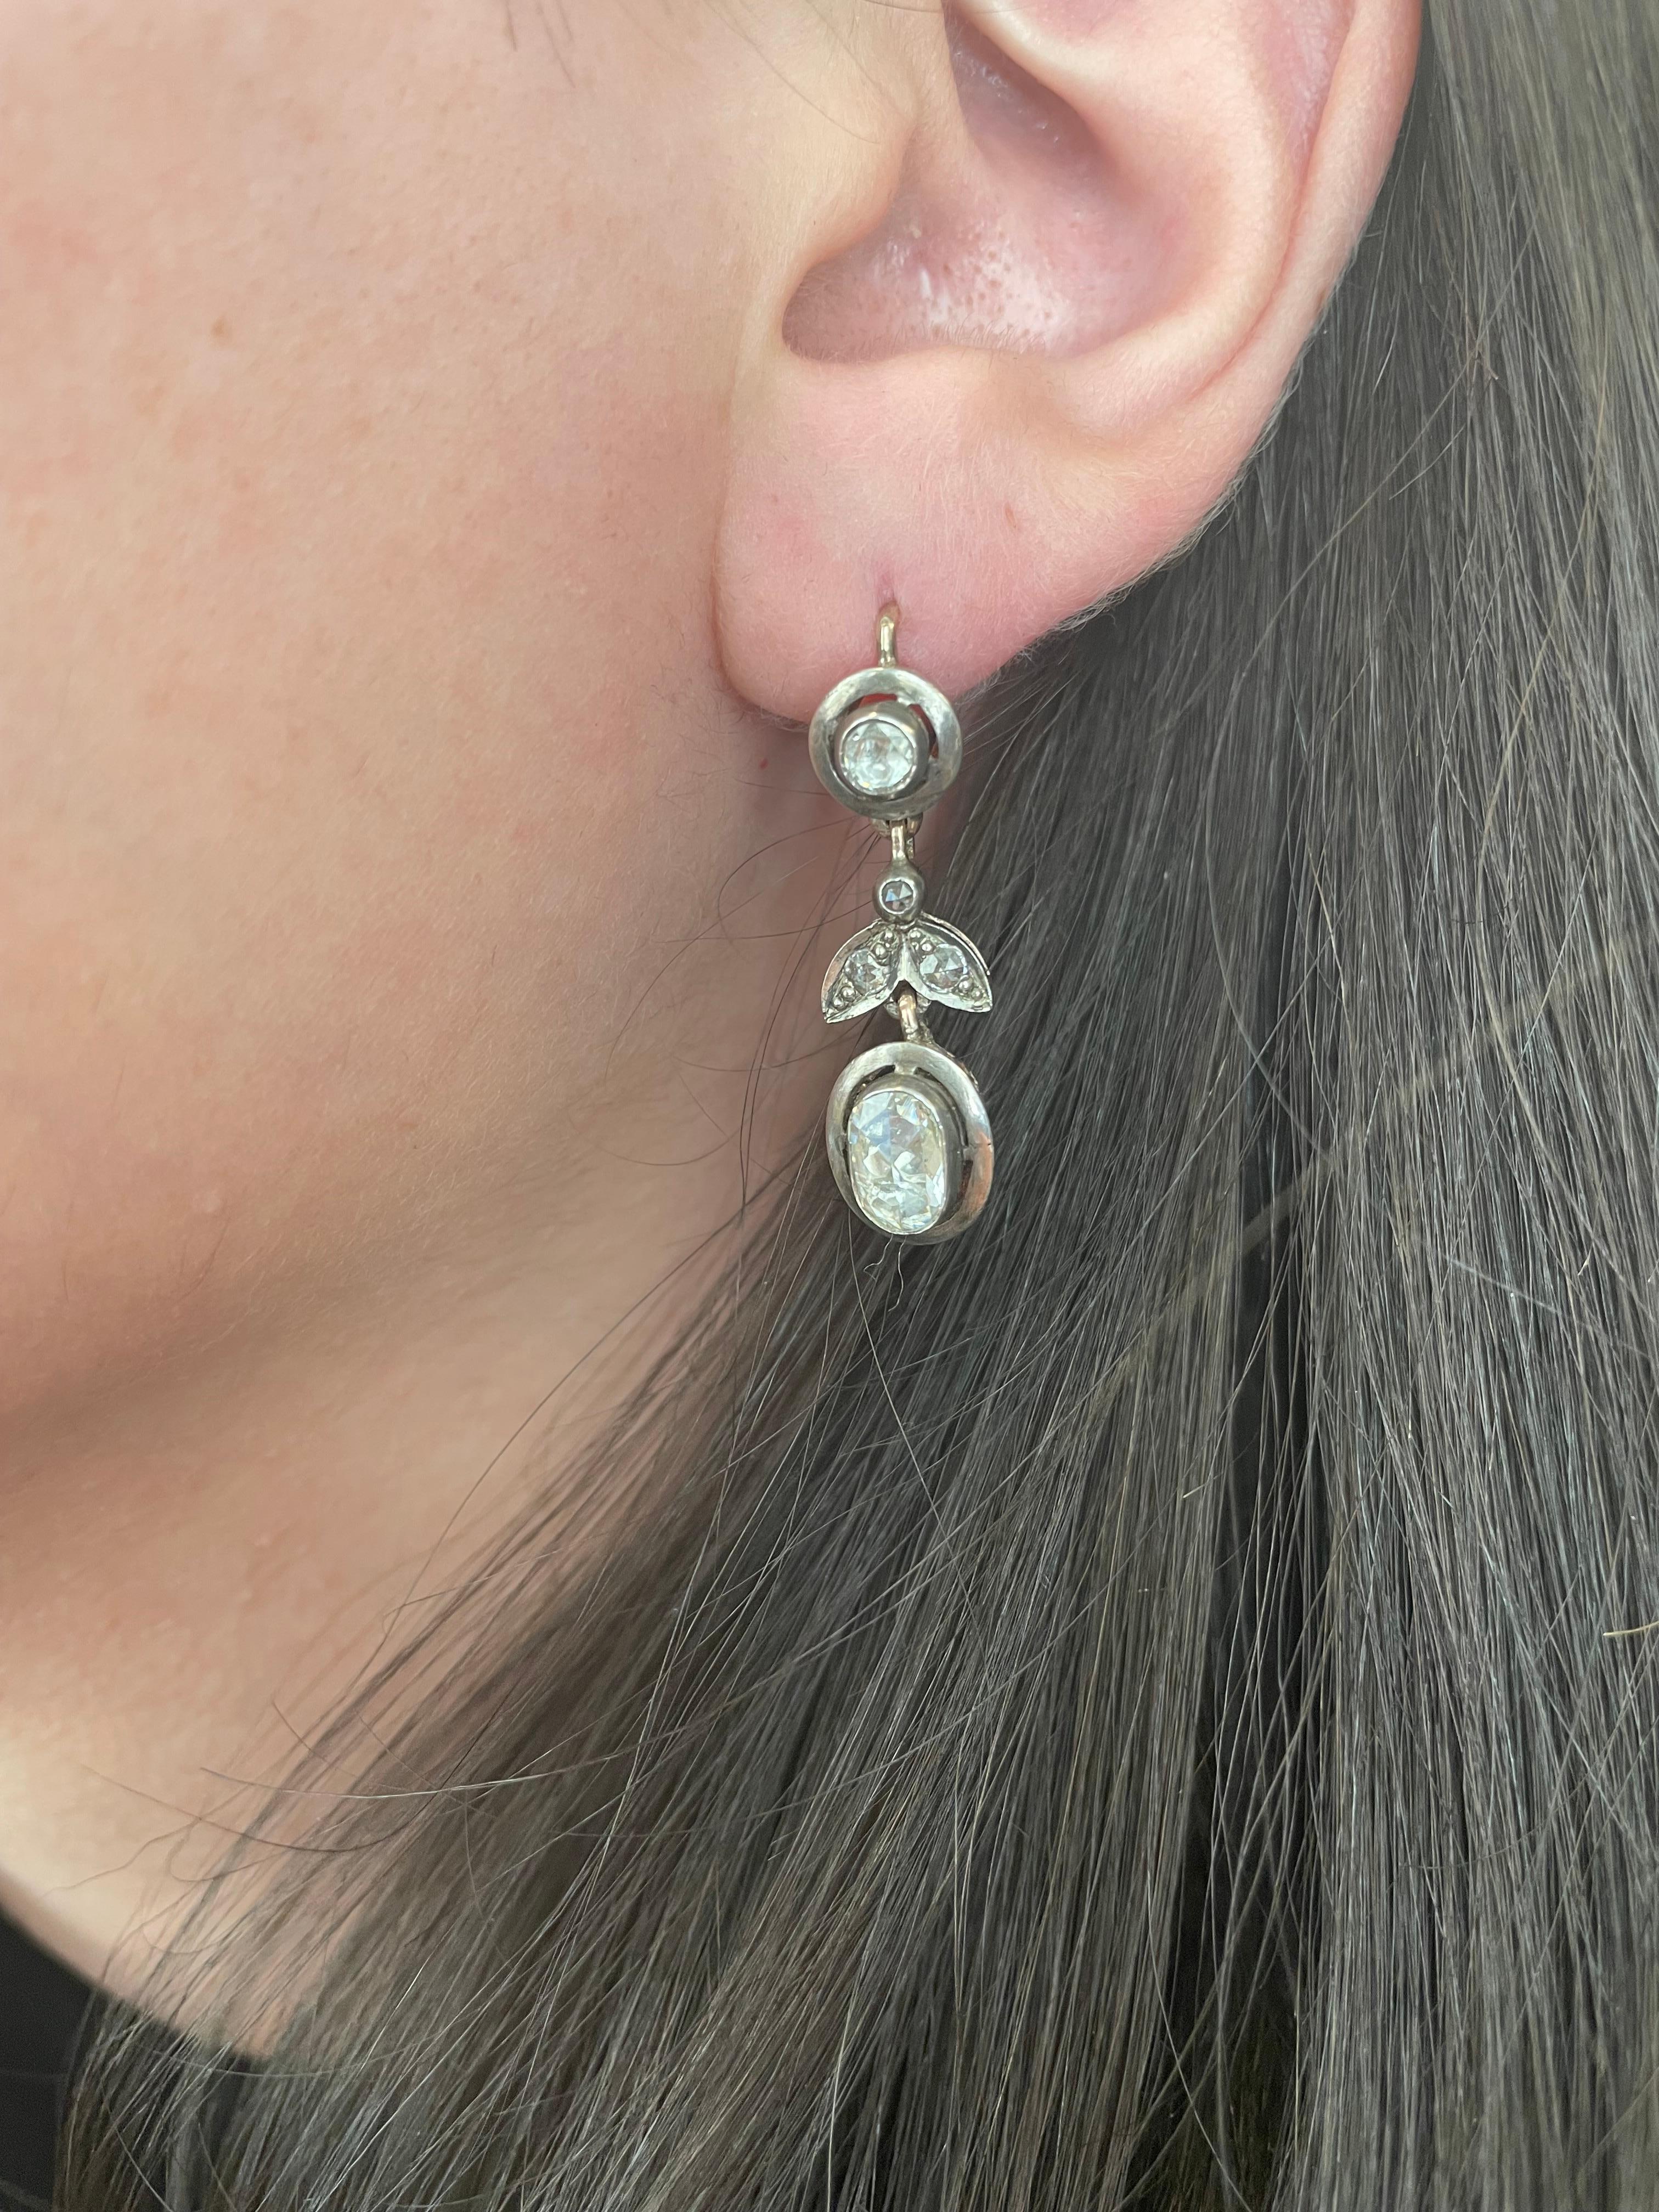 Statement Victorian inspired chandelier earrings.
Approximately 4 carats of oval and round rose cut diamonds, H/I color and SI clarity. Gold & silver.
Accommodated with an up to date appraisal by a GIA G.G. upon request. please contact us with any